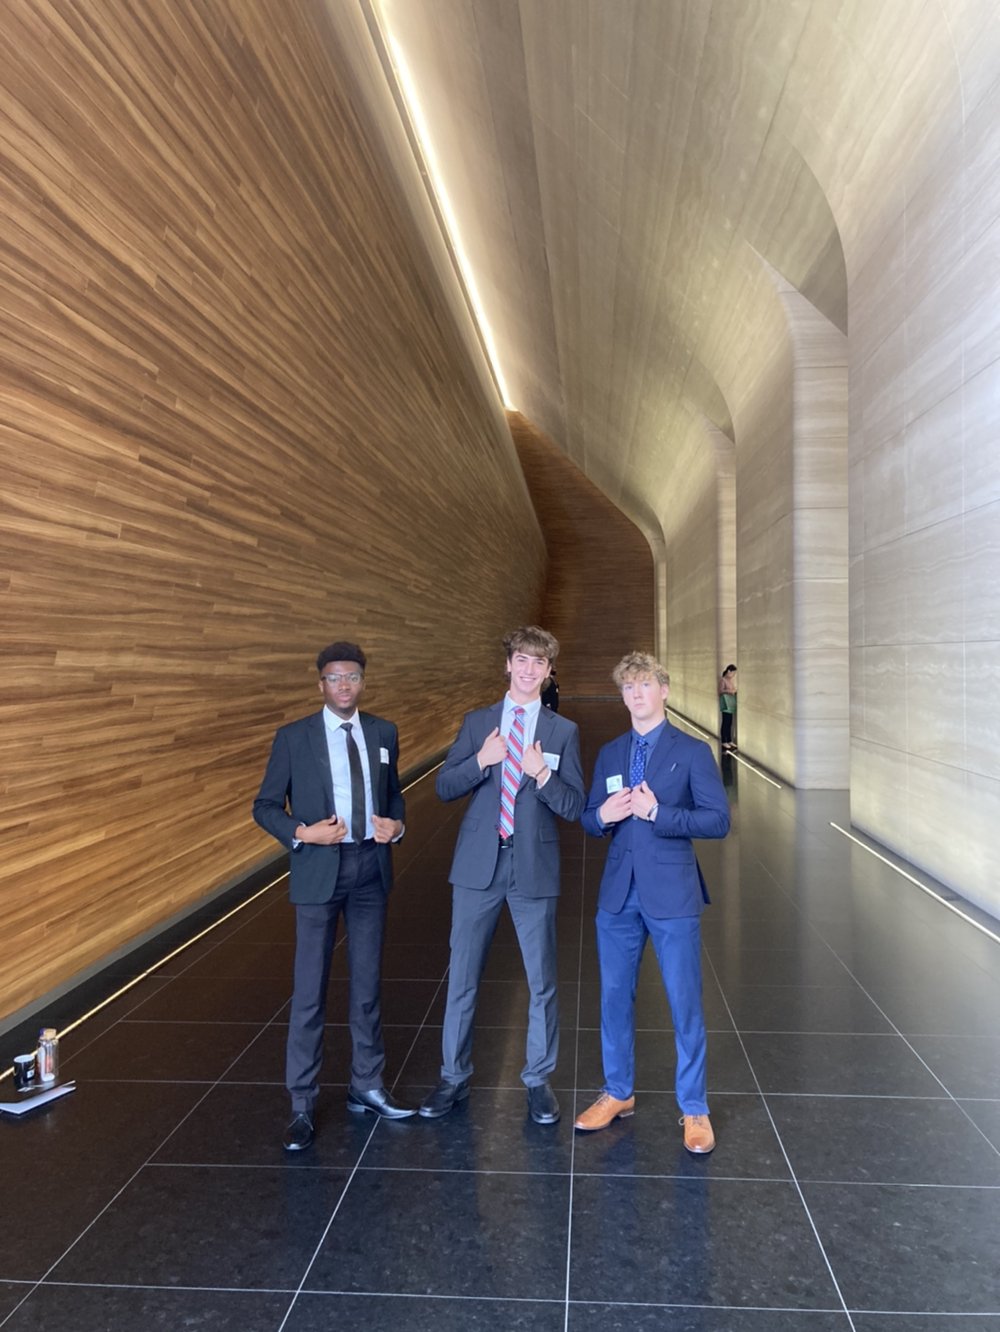 From left to right, Uzochi Onyenkpa, Noah Marotta, and Will Moroney pose for a photo in the hallway of EY.